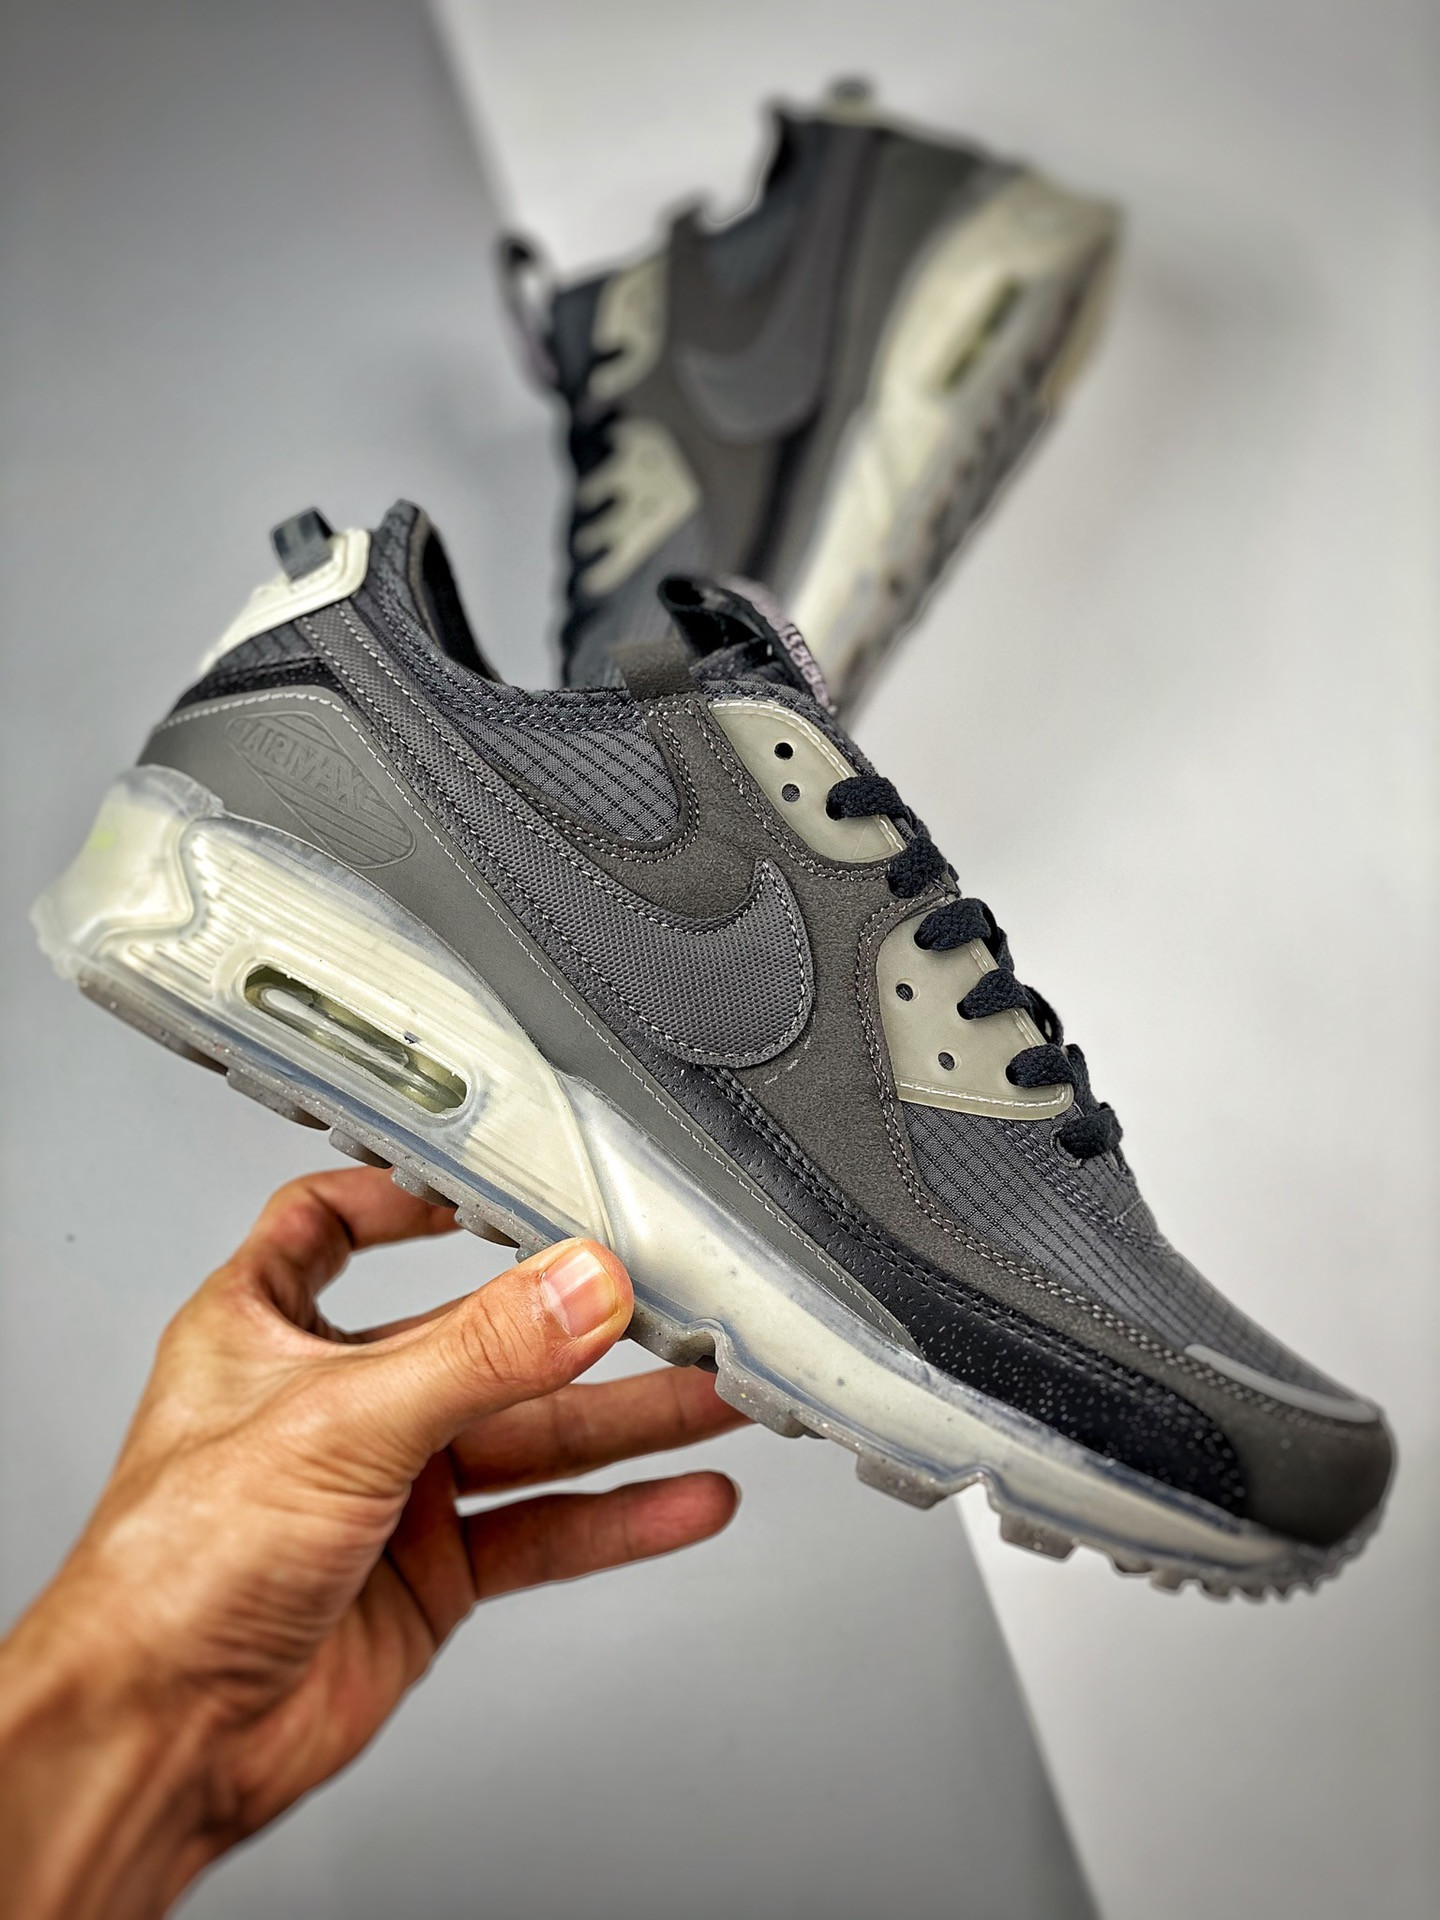 Nike Air Max 90 Terrascape Black Dark Grey-Lime Ice-Anthracite DH2973-001 For Sale